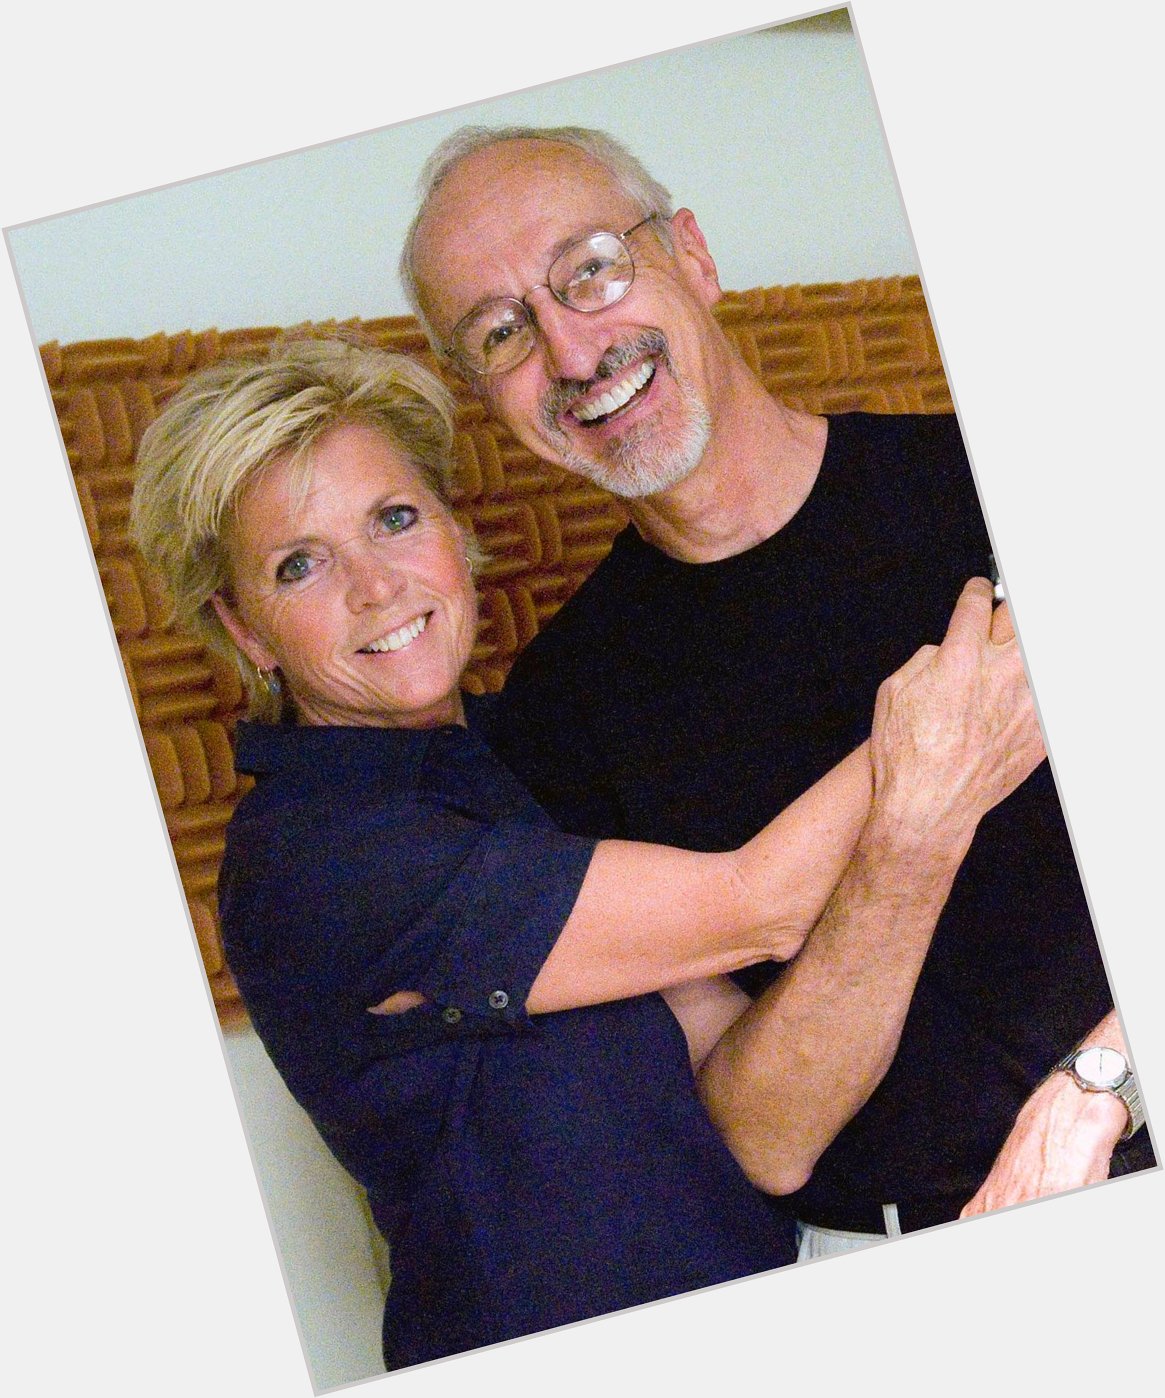 Happy birthday to both Michael Gross and Meredith Baxter, both in 1947. They were meant to be married. 